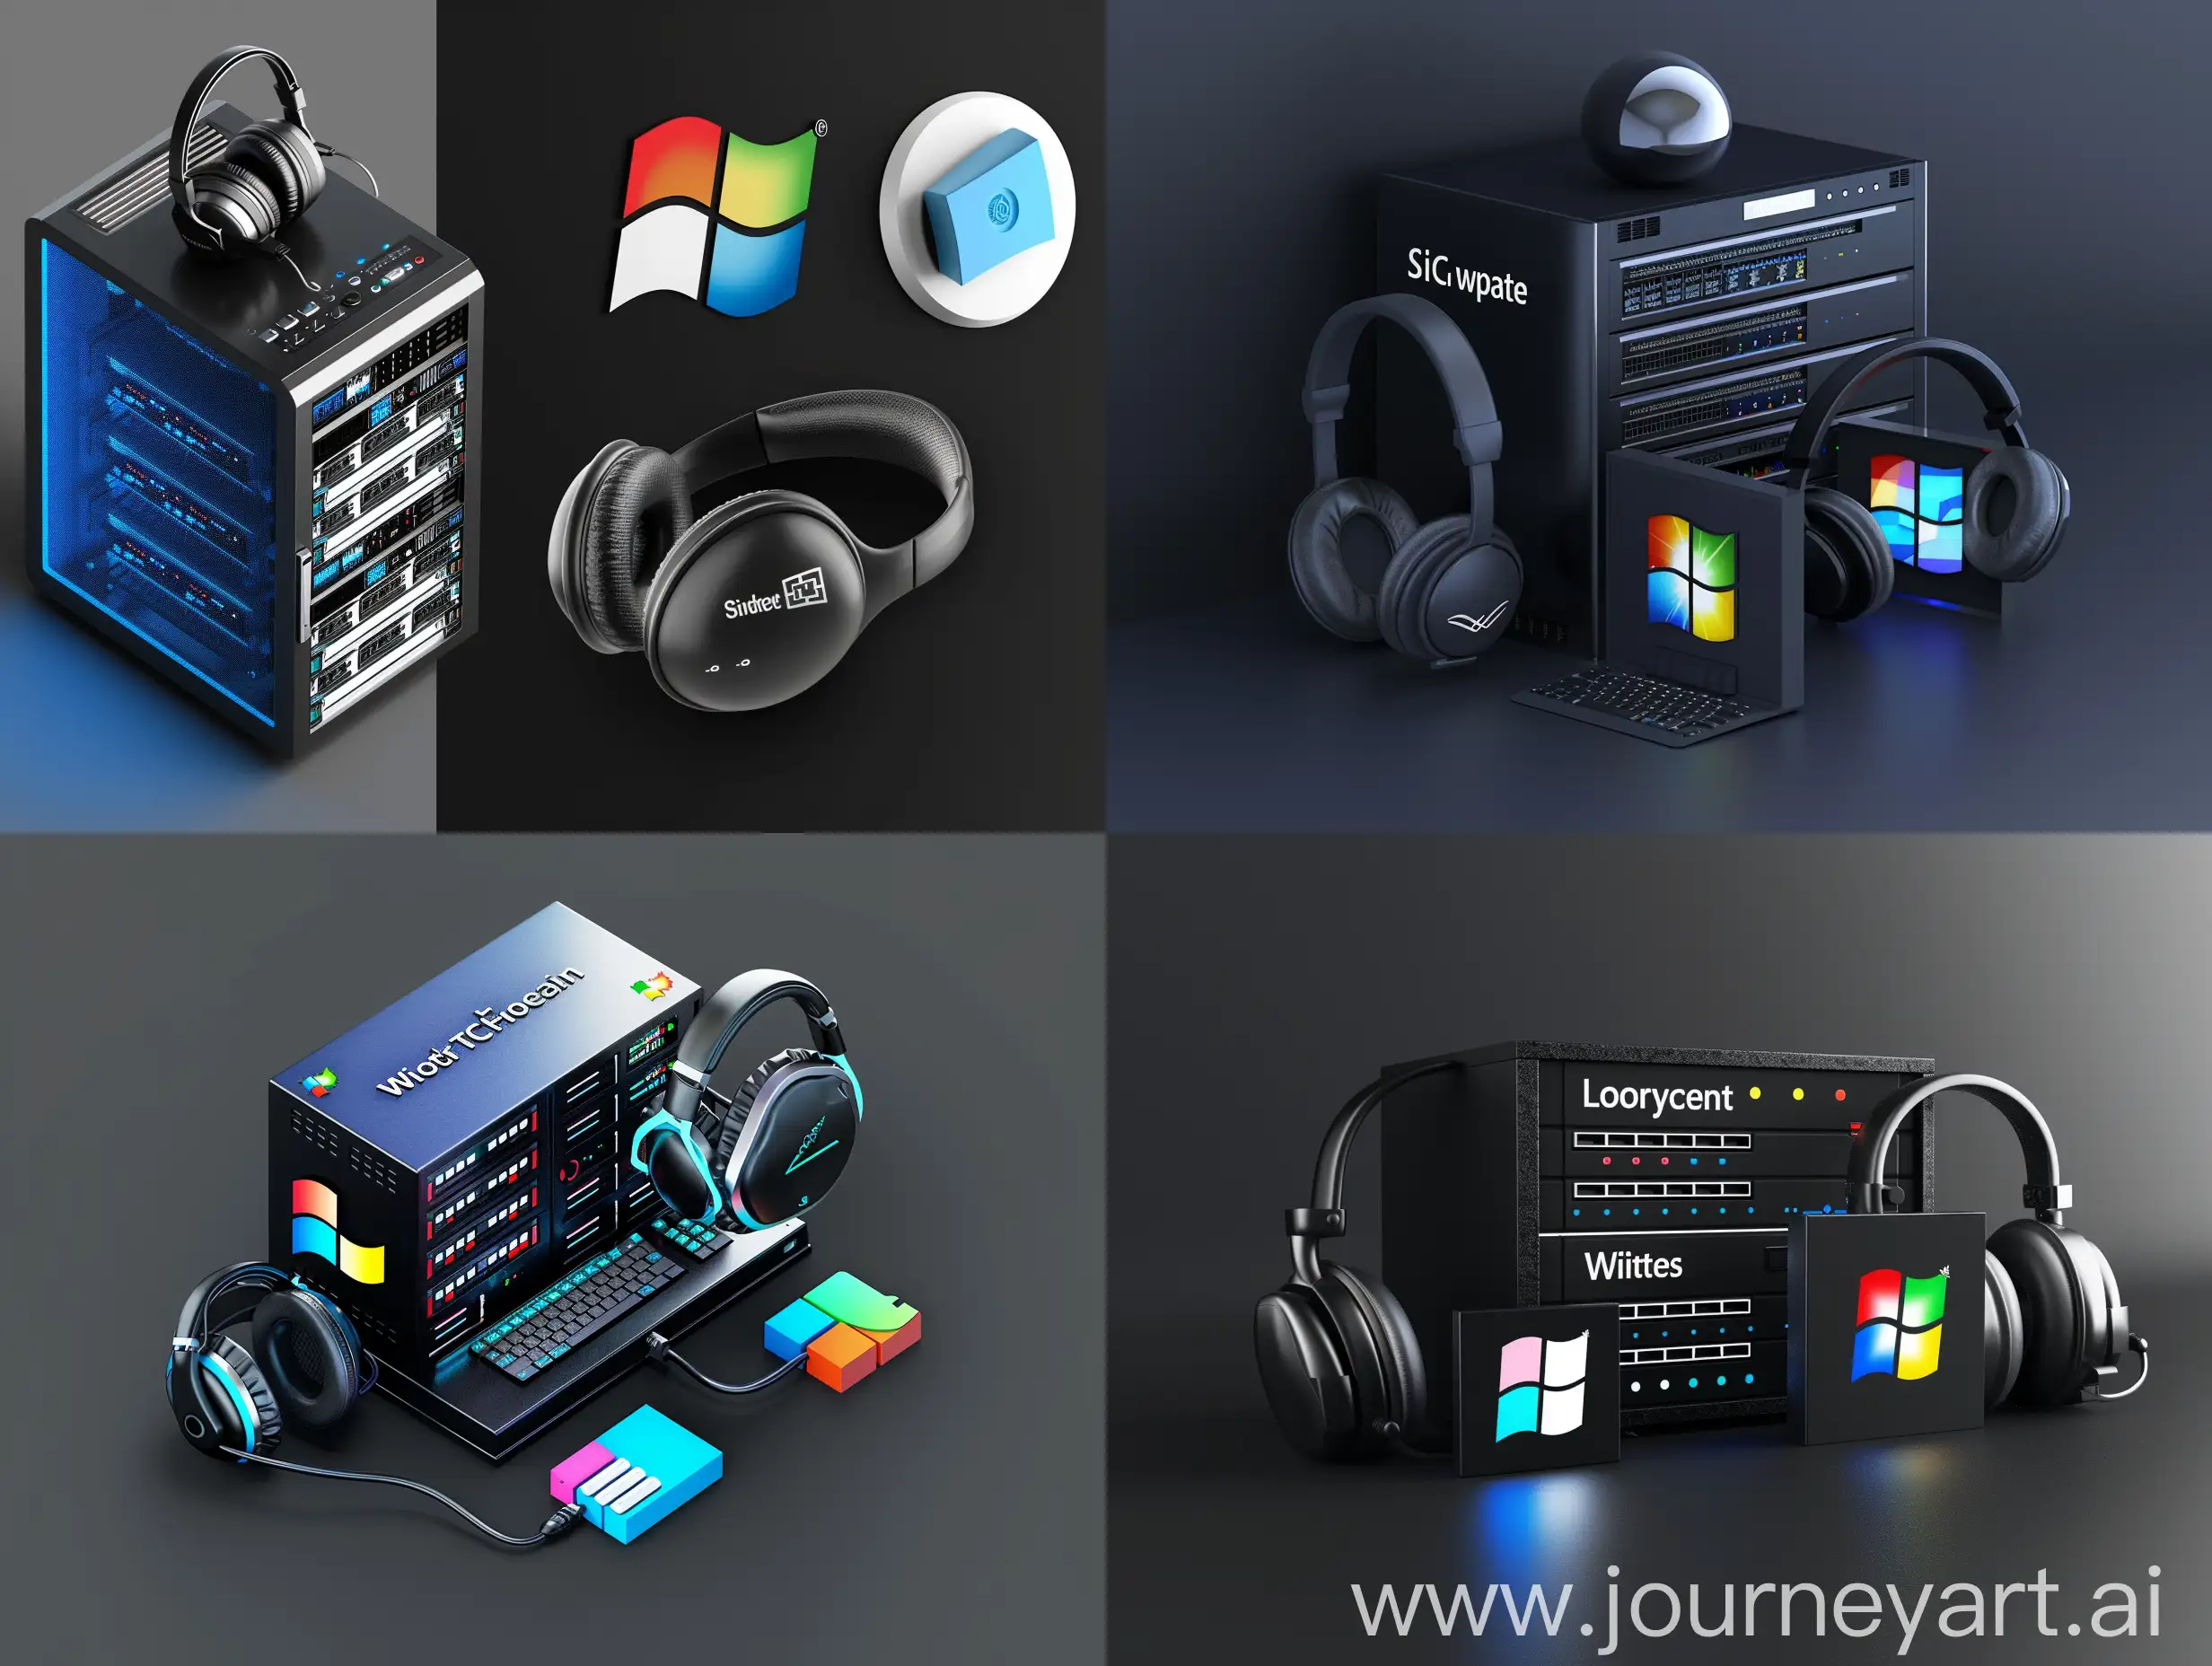 IT-Support-Workspace-with-Server-Headset-and-OS-Logos-on-Black-Background